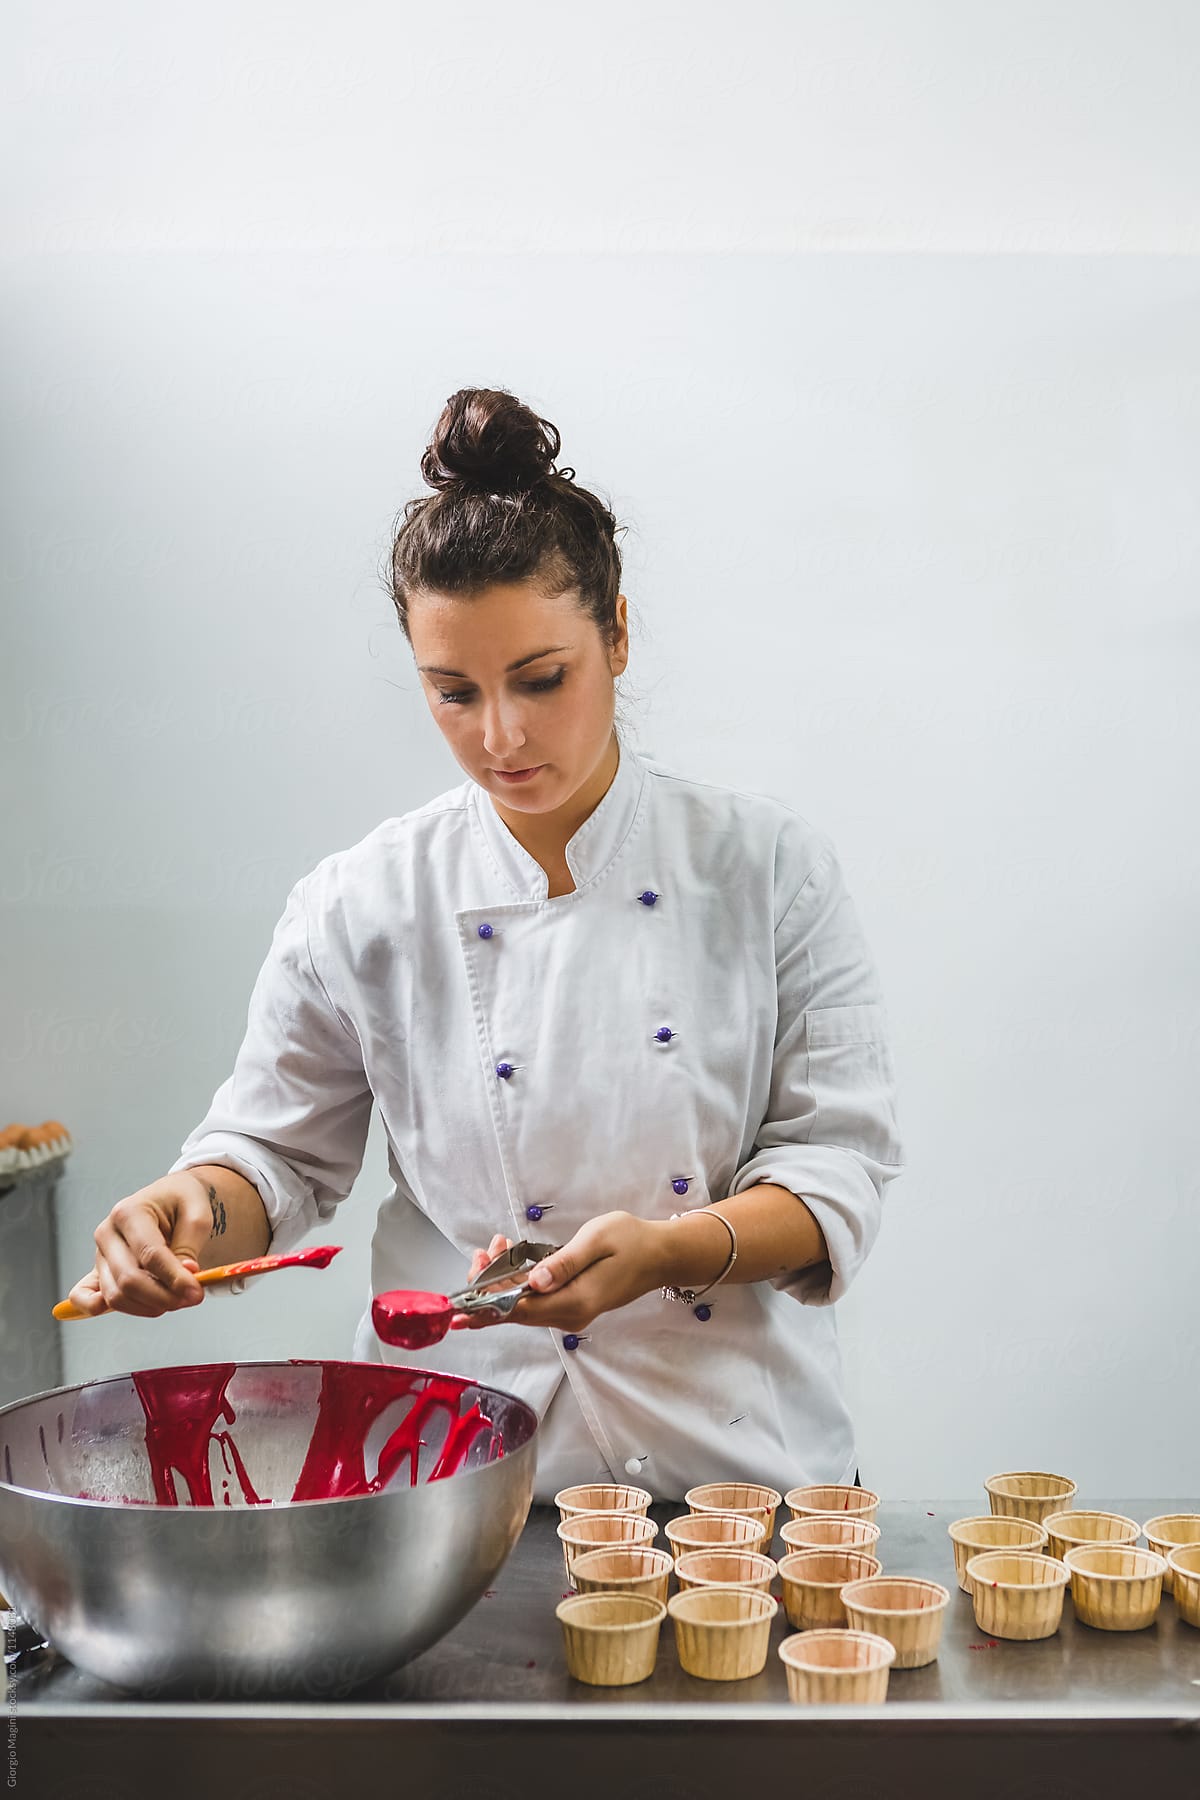 Woman Pastry Chef Preparing Red Batter Muffins to Bake